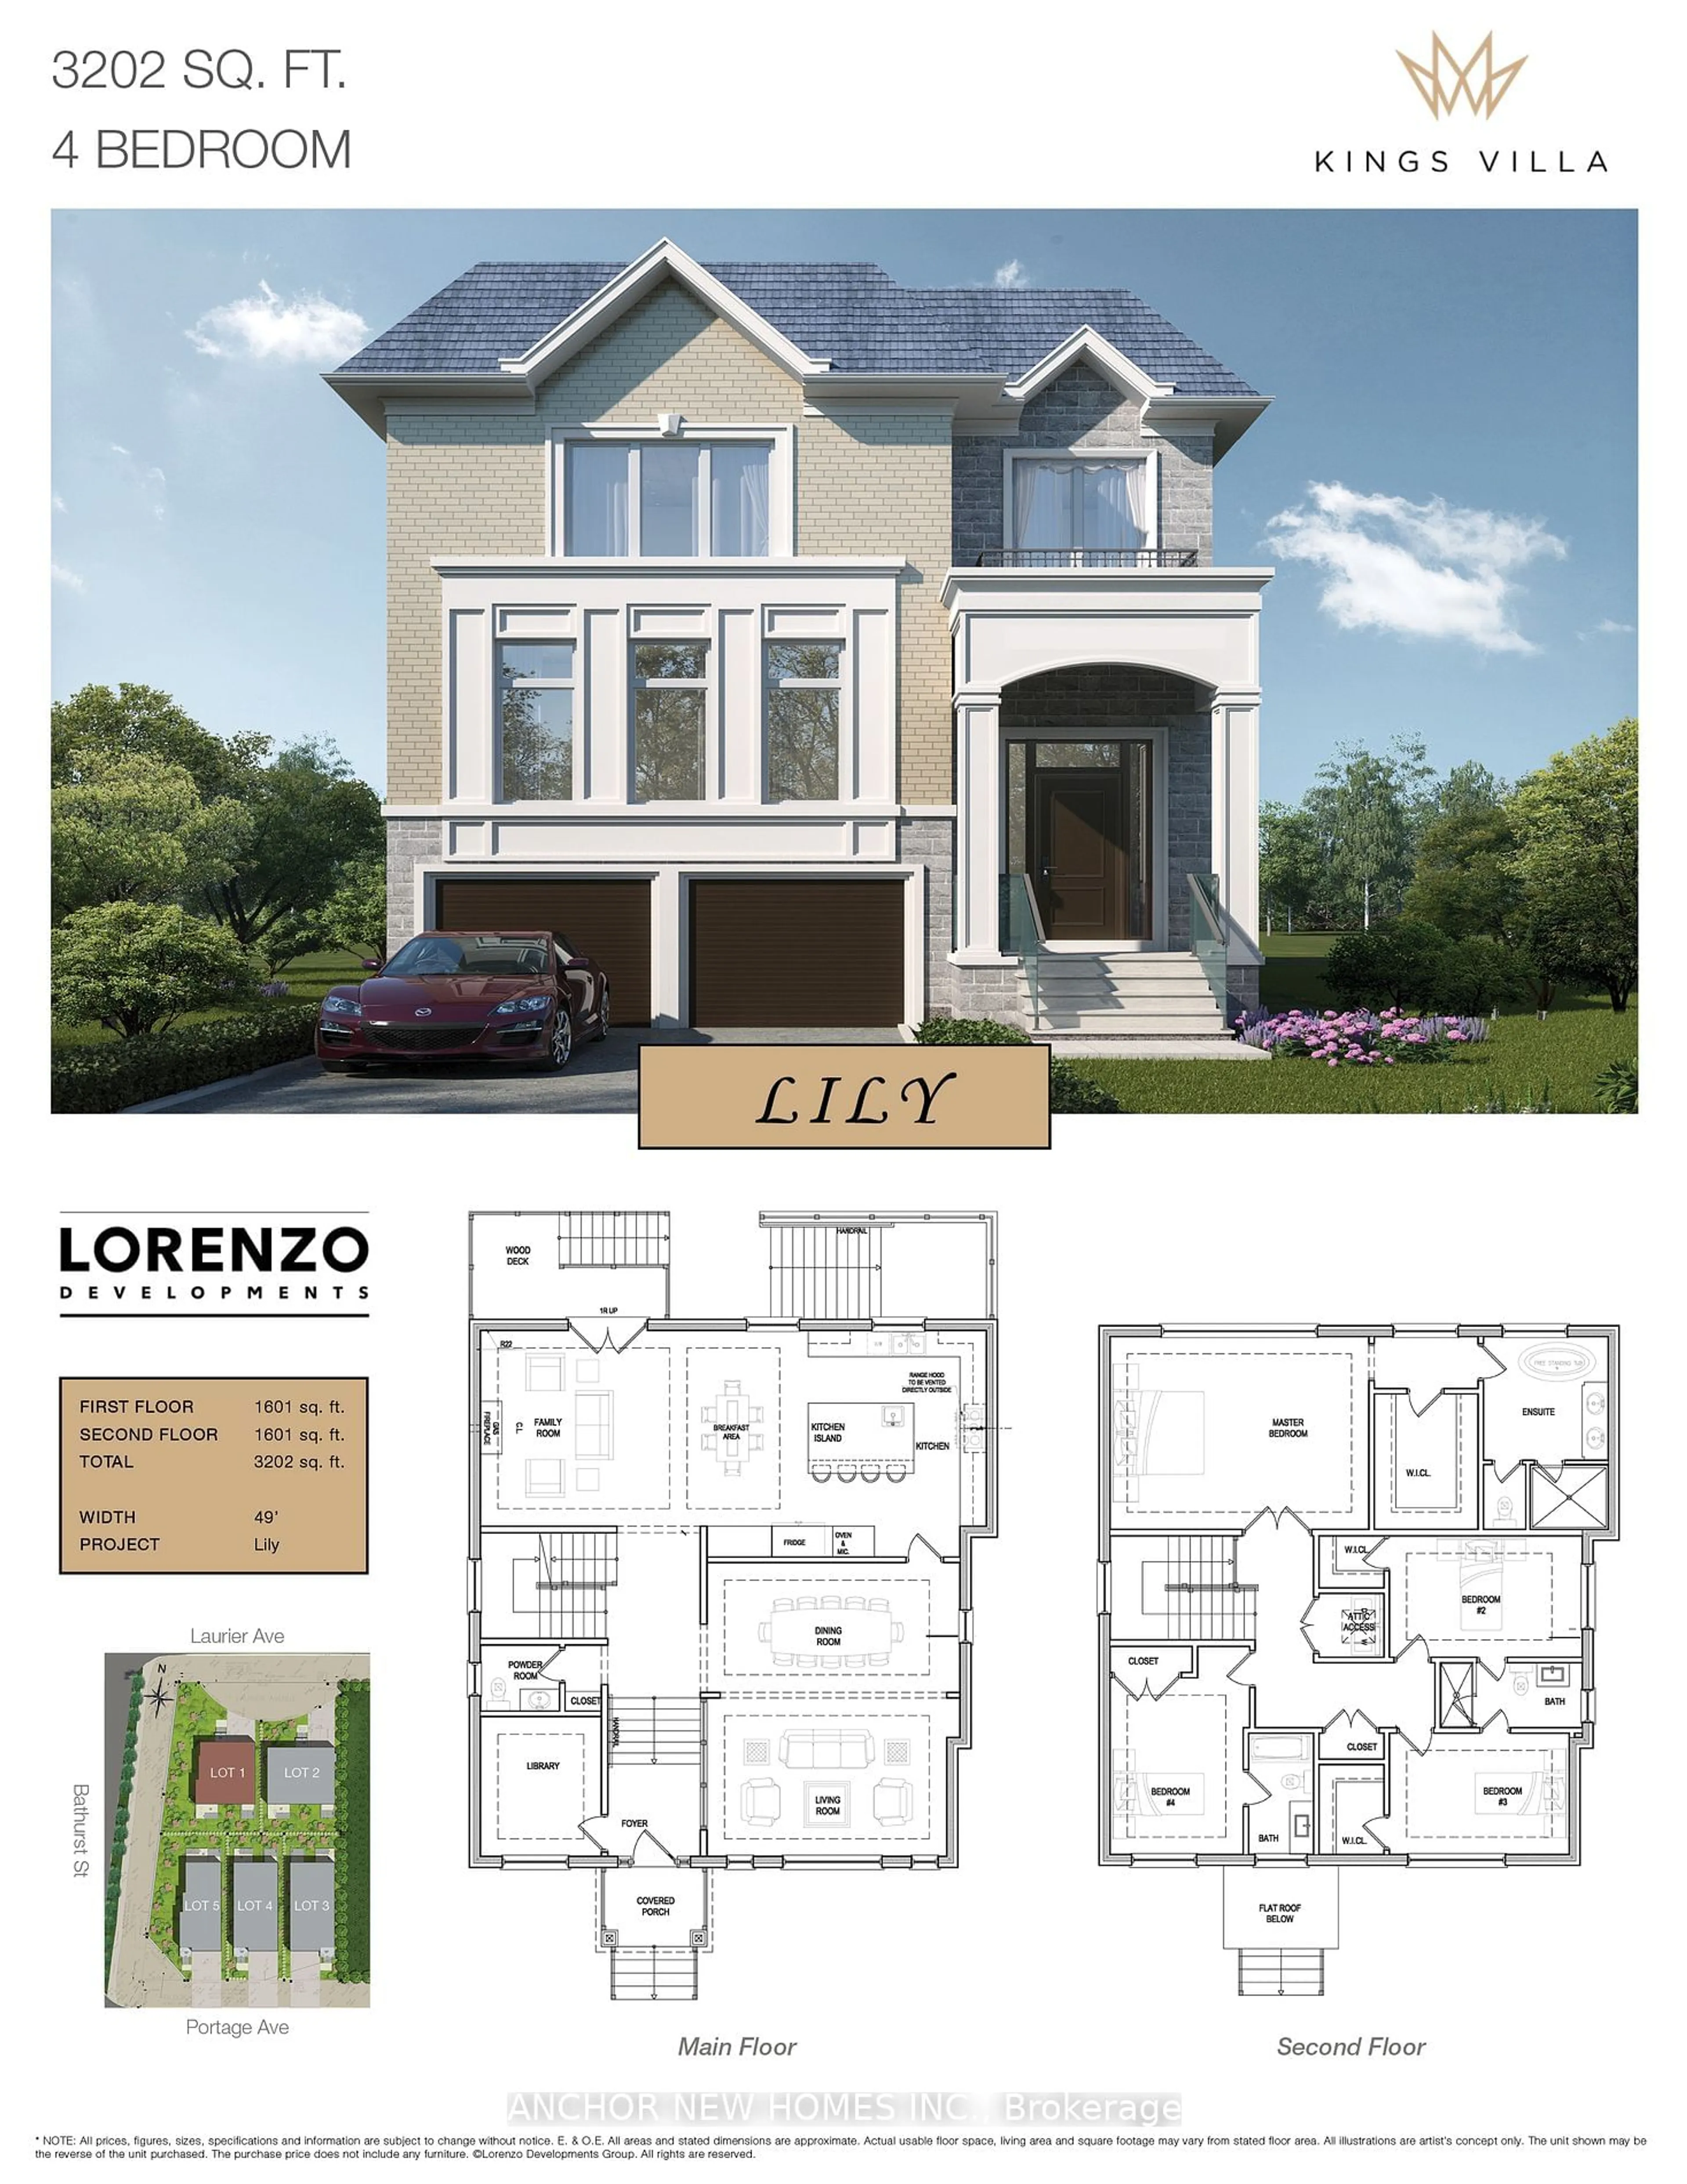 Floor plan for 15 Laurier Ave, Richmond Hill Ontario L4E 2Z4